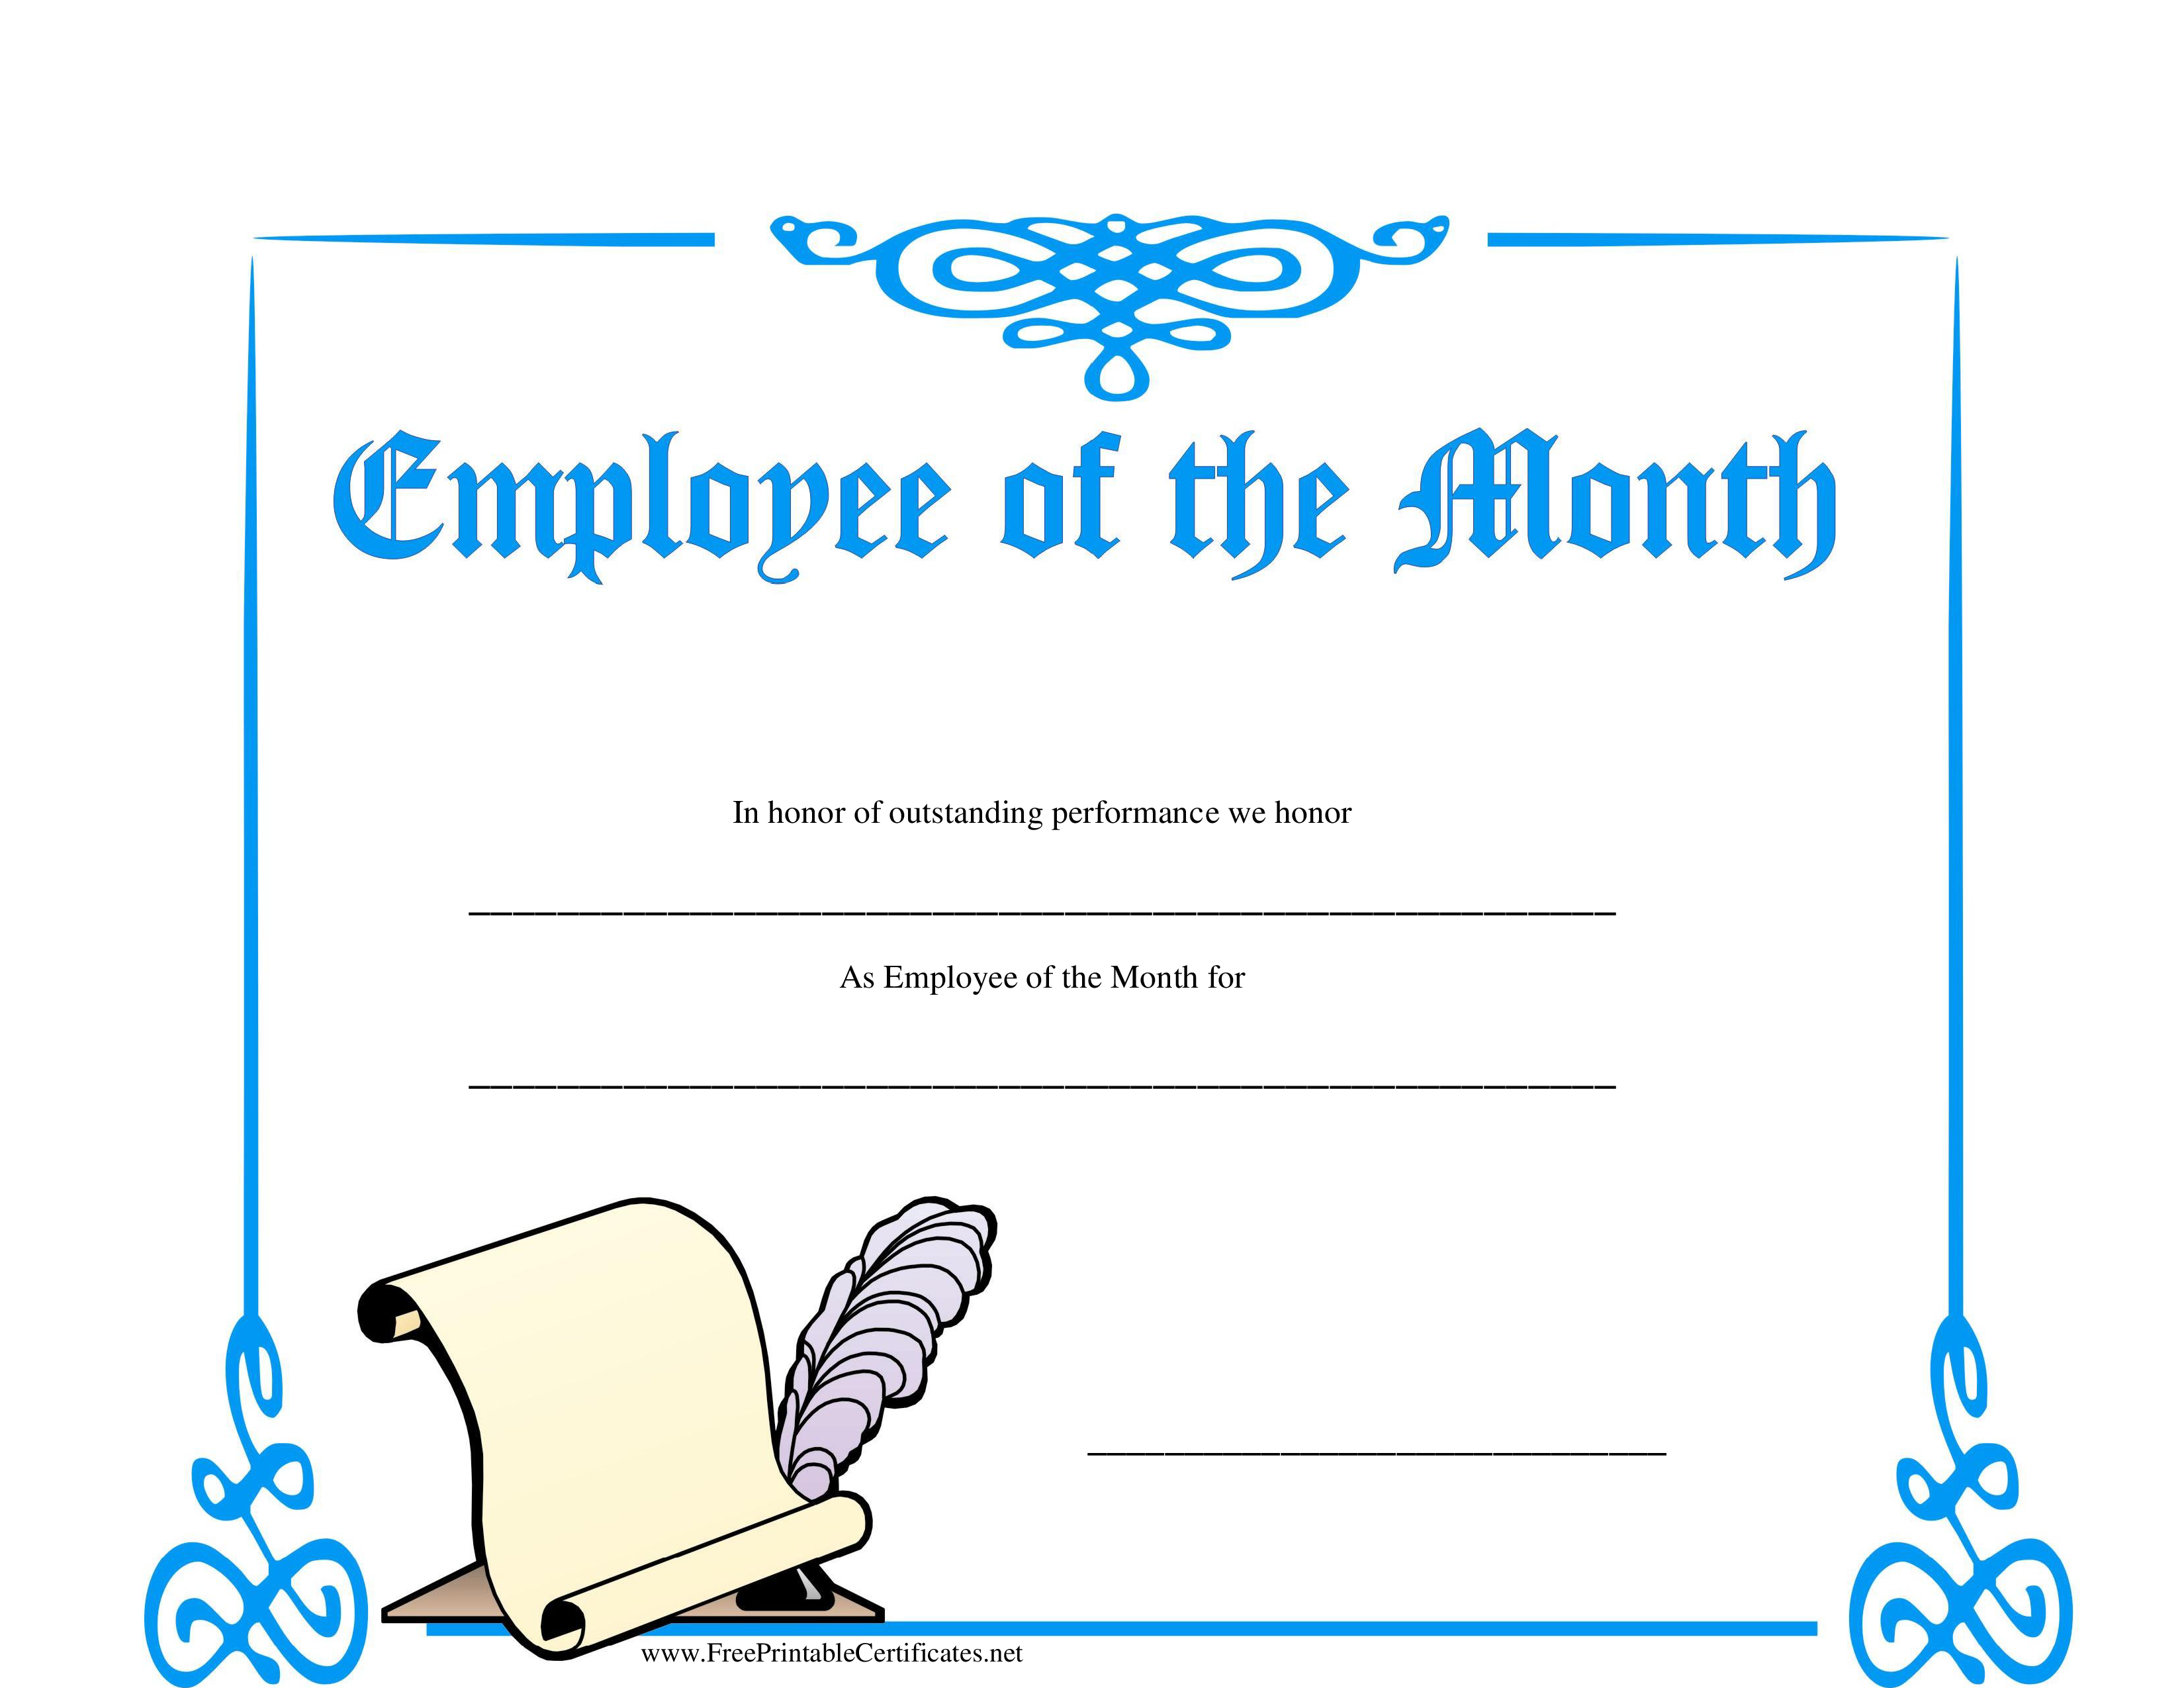 Employee Of The Month Certificate main image